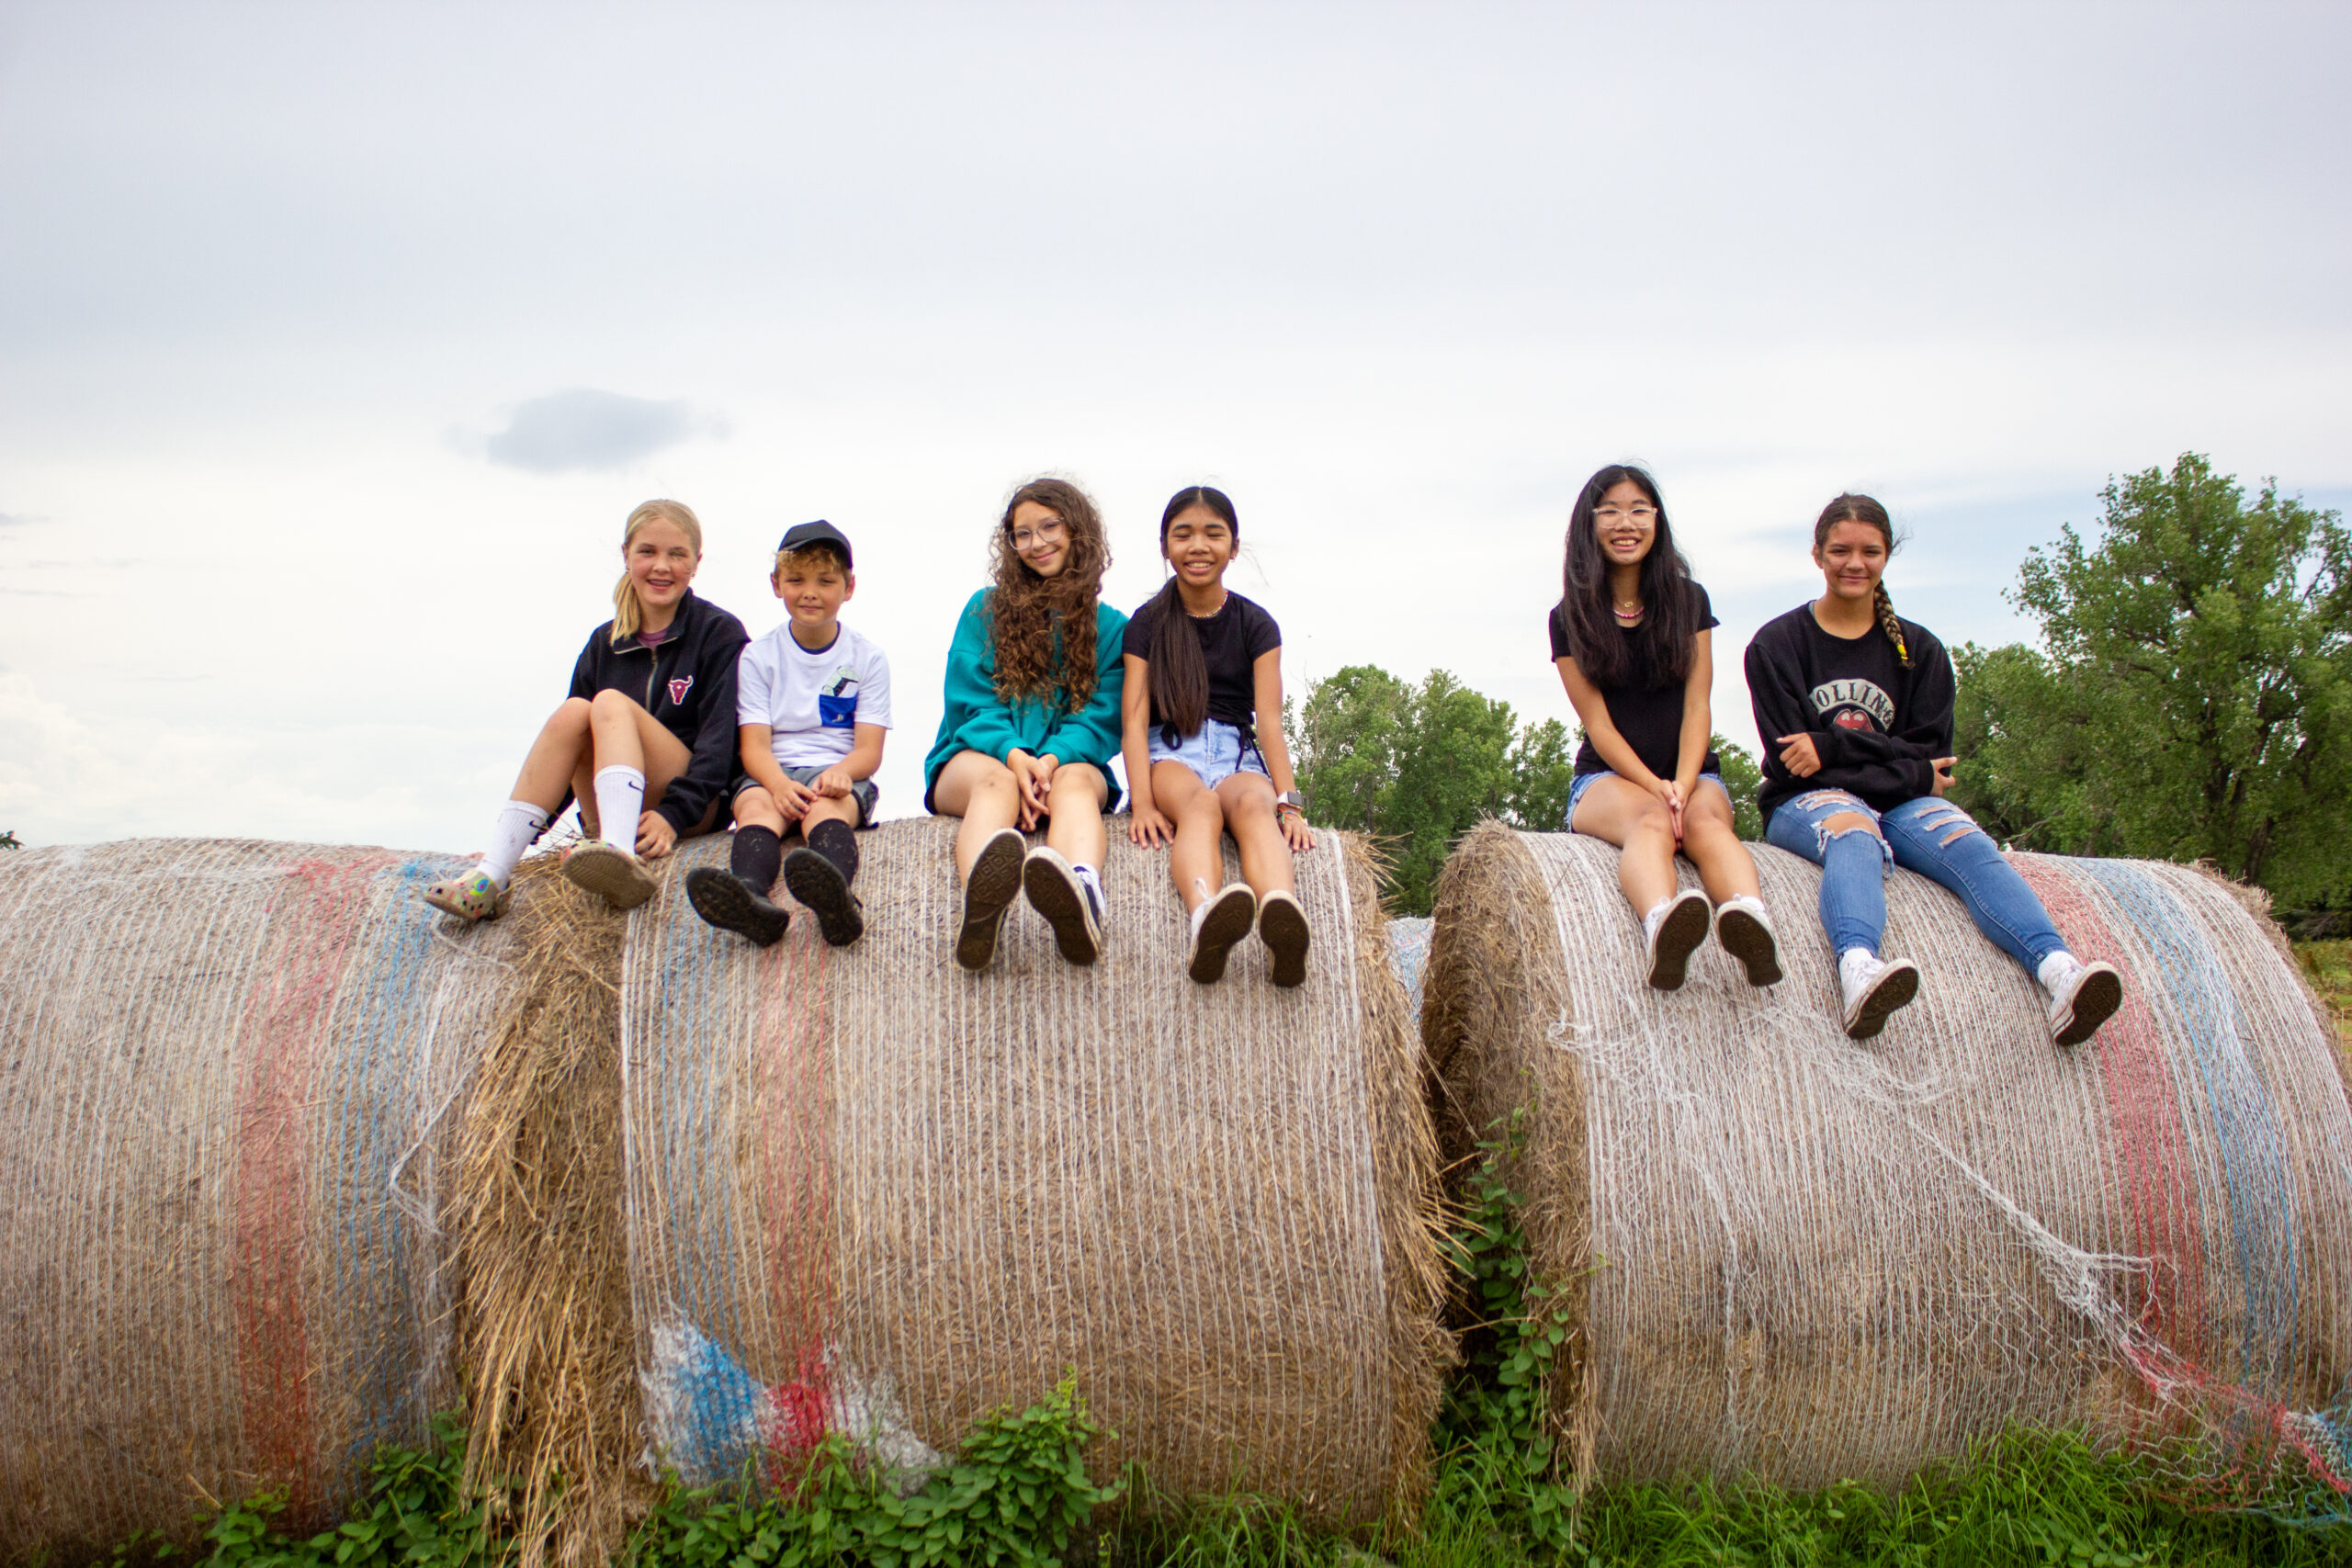 A group of six people, four girls and two boys, sit on large hay bales outdoors. They are casually dressed, wearing shorts and t-shirts. The background features a cloudy sky and green trees.